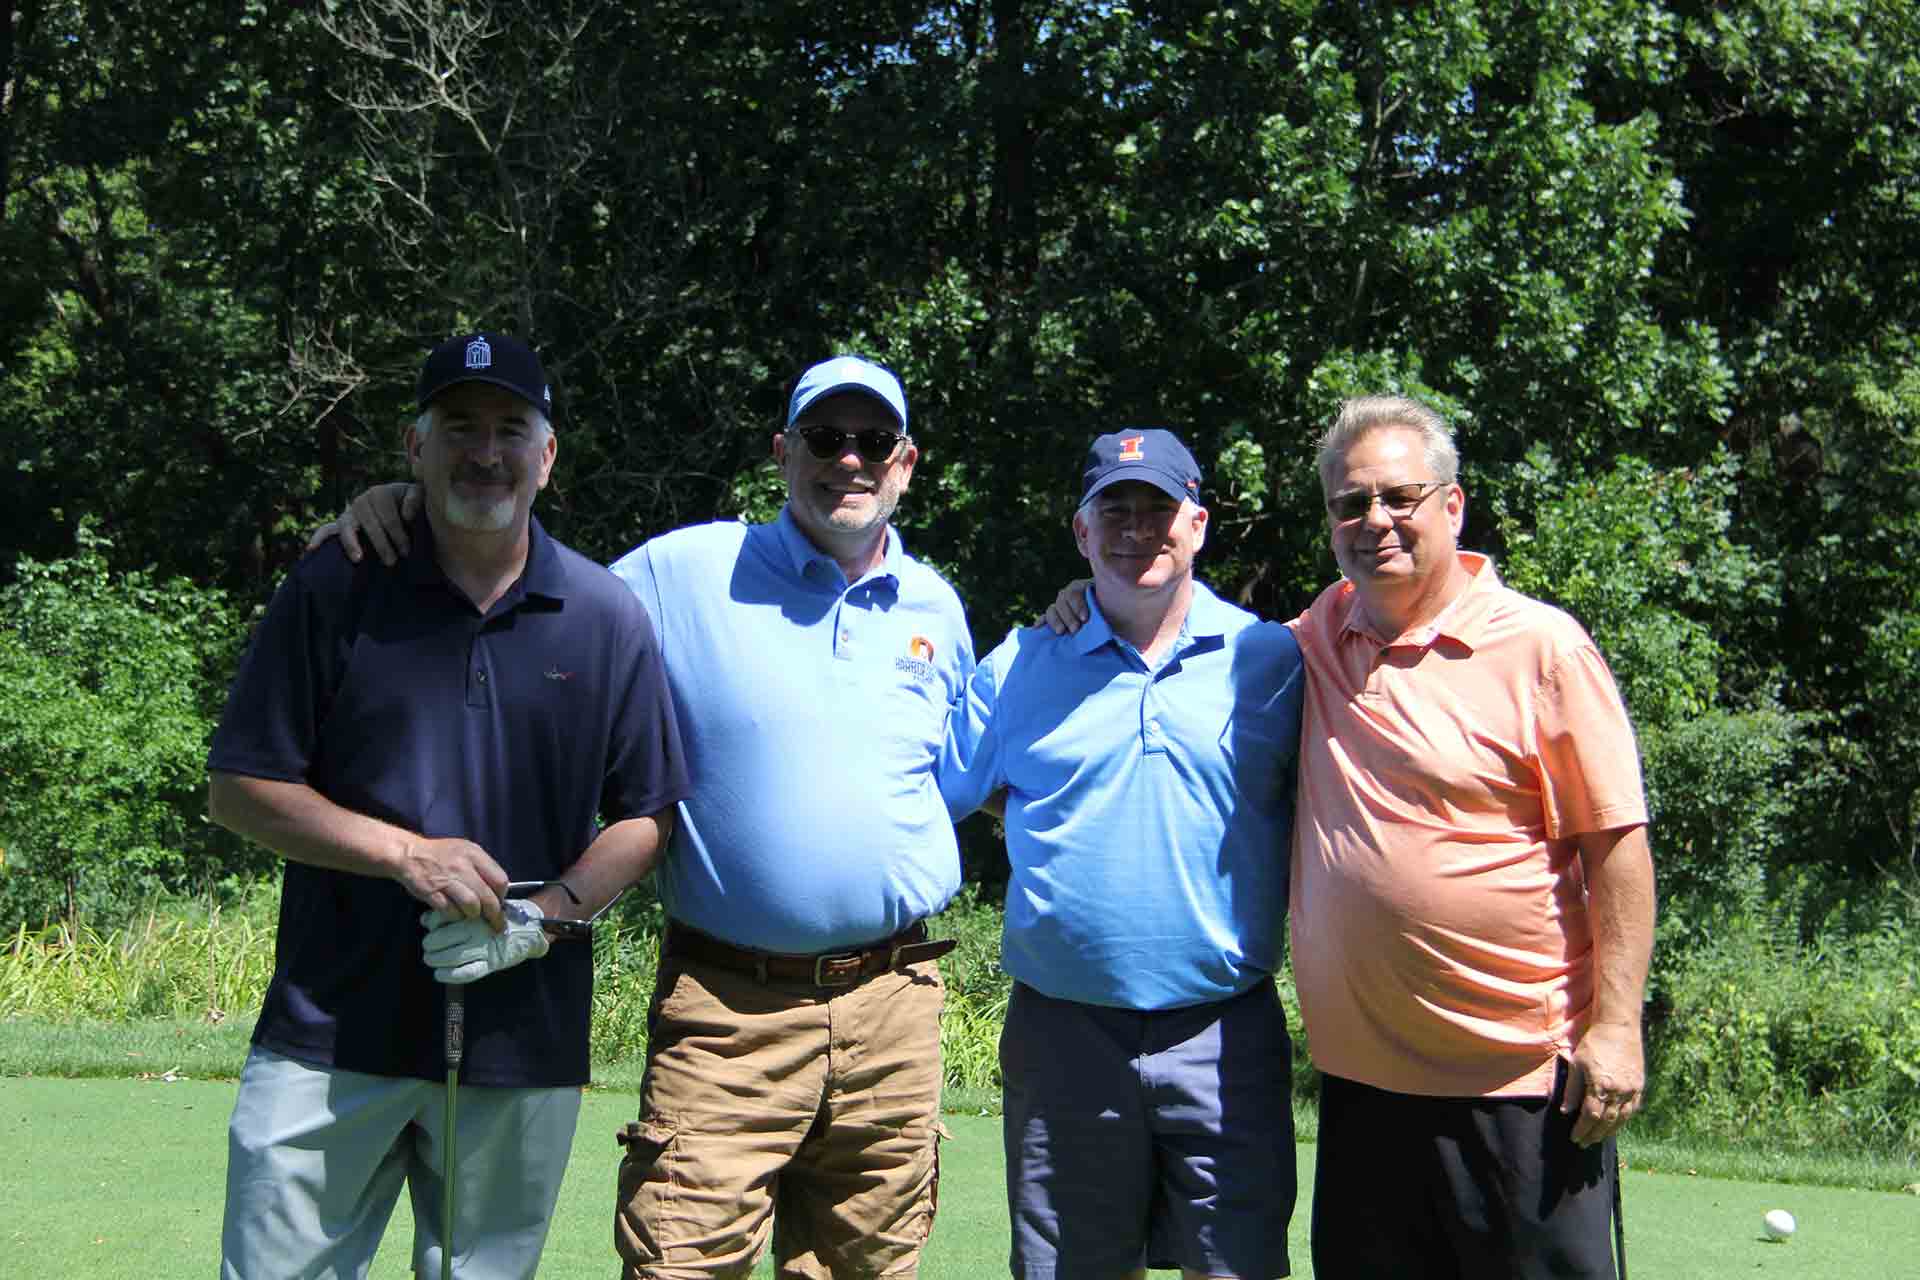 marist-law-association-golf-outing-four-golfers-on-golf-course